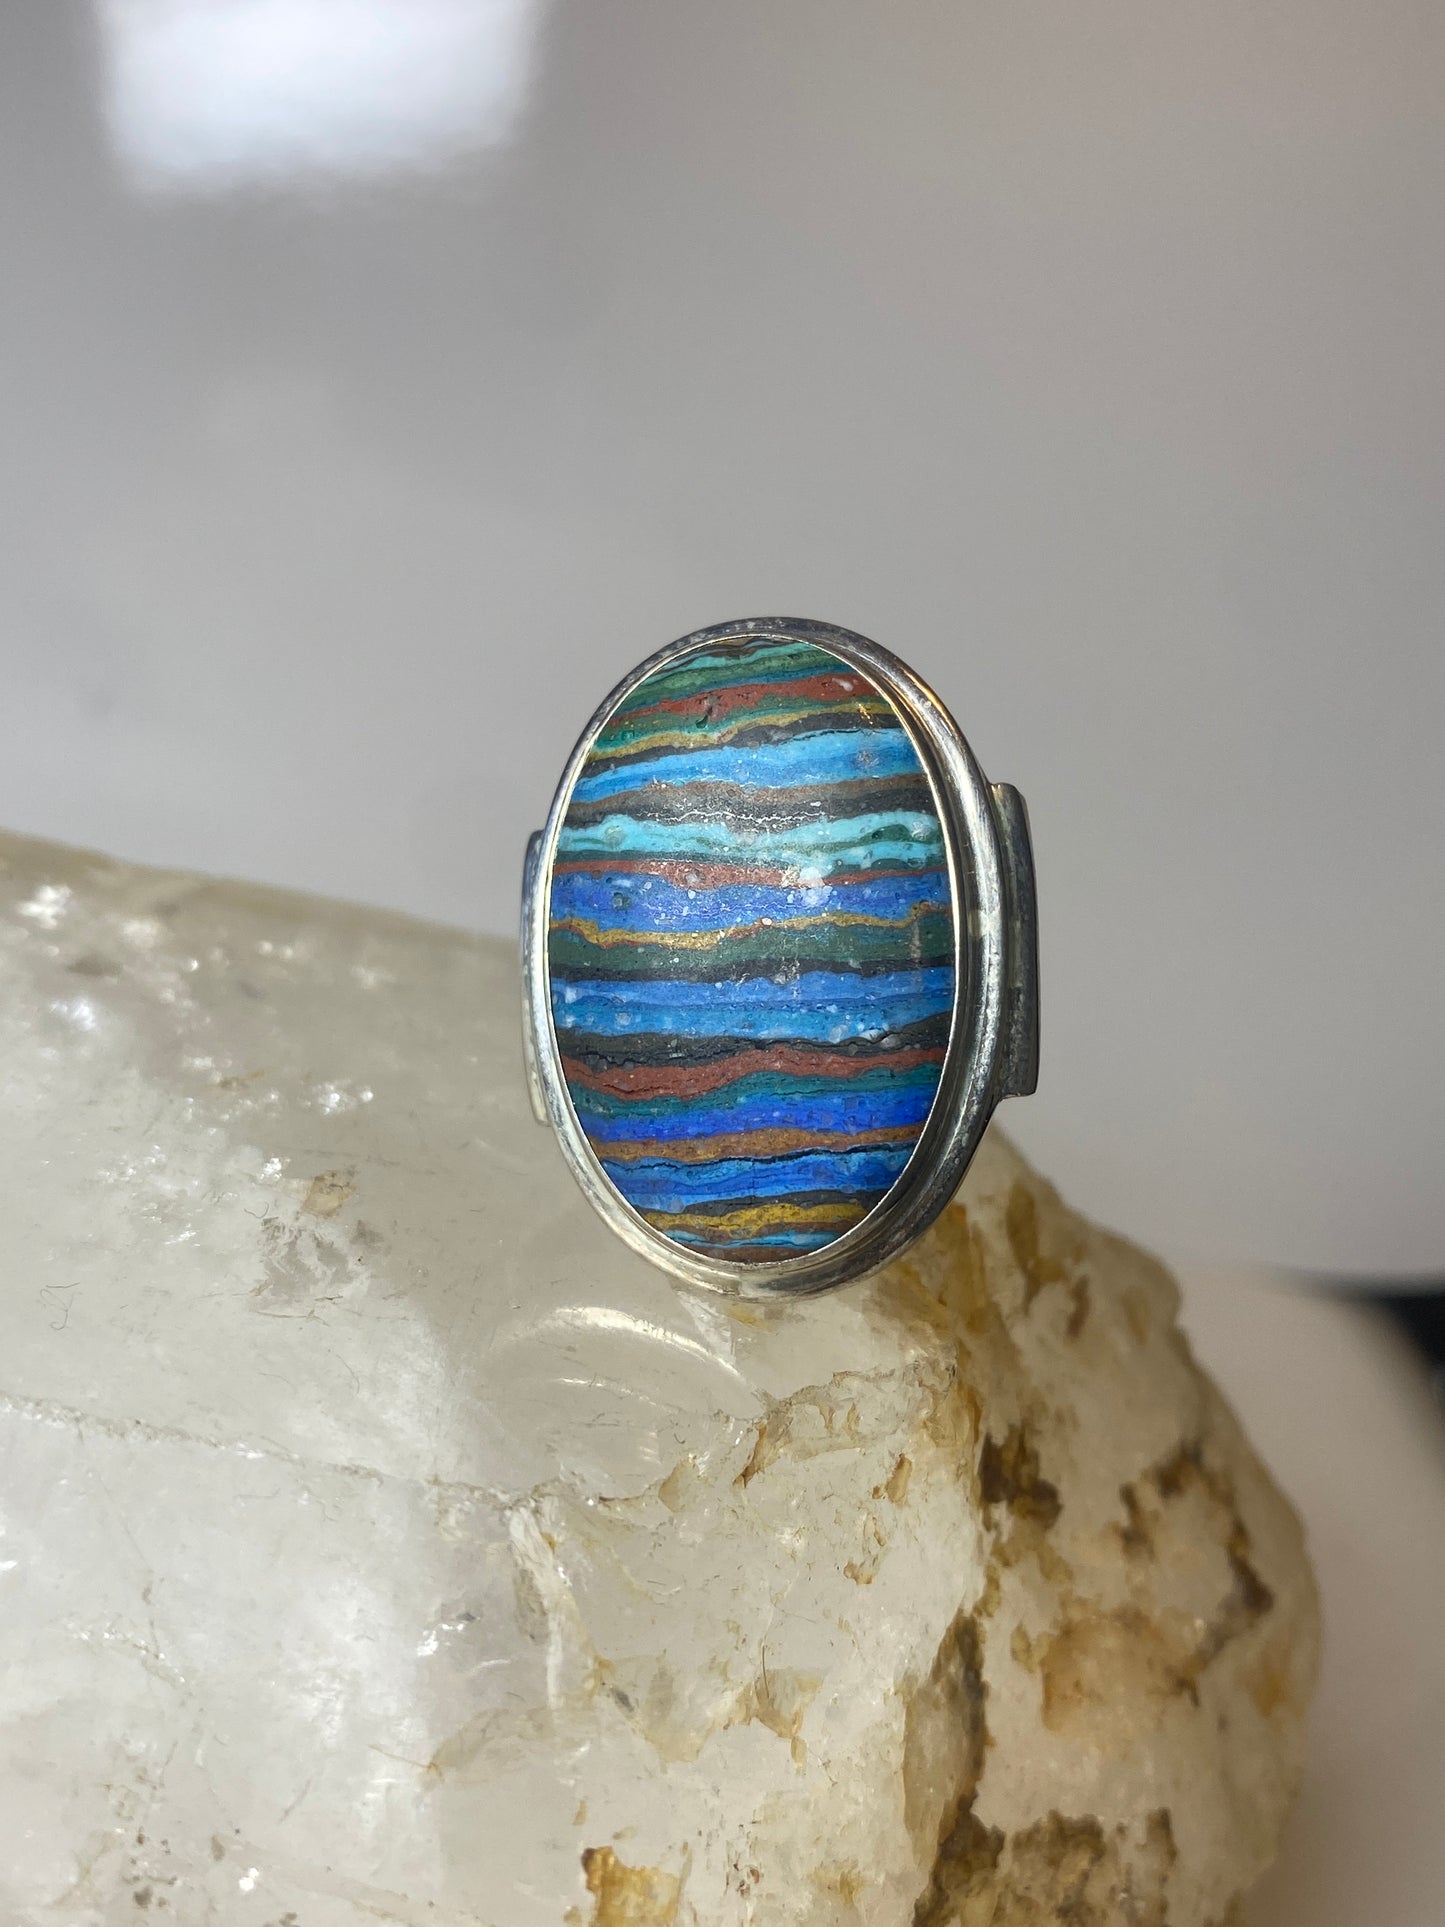 Rainbow Casilica ring size 12.25 southwest band sterling silver men